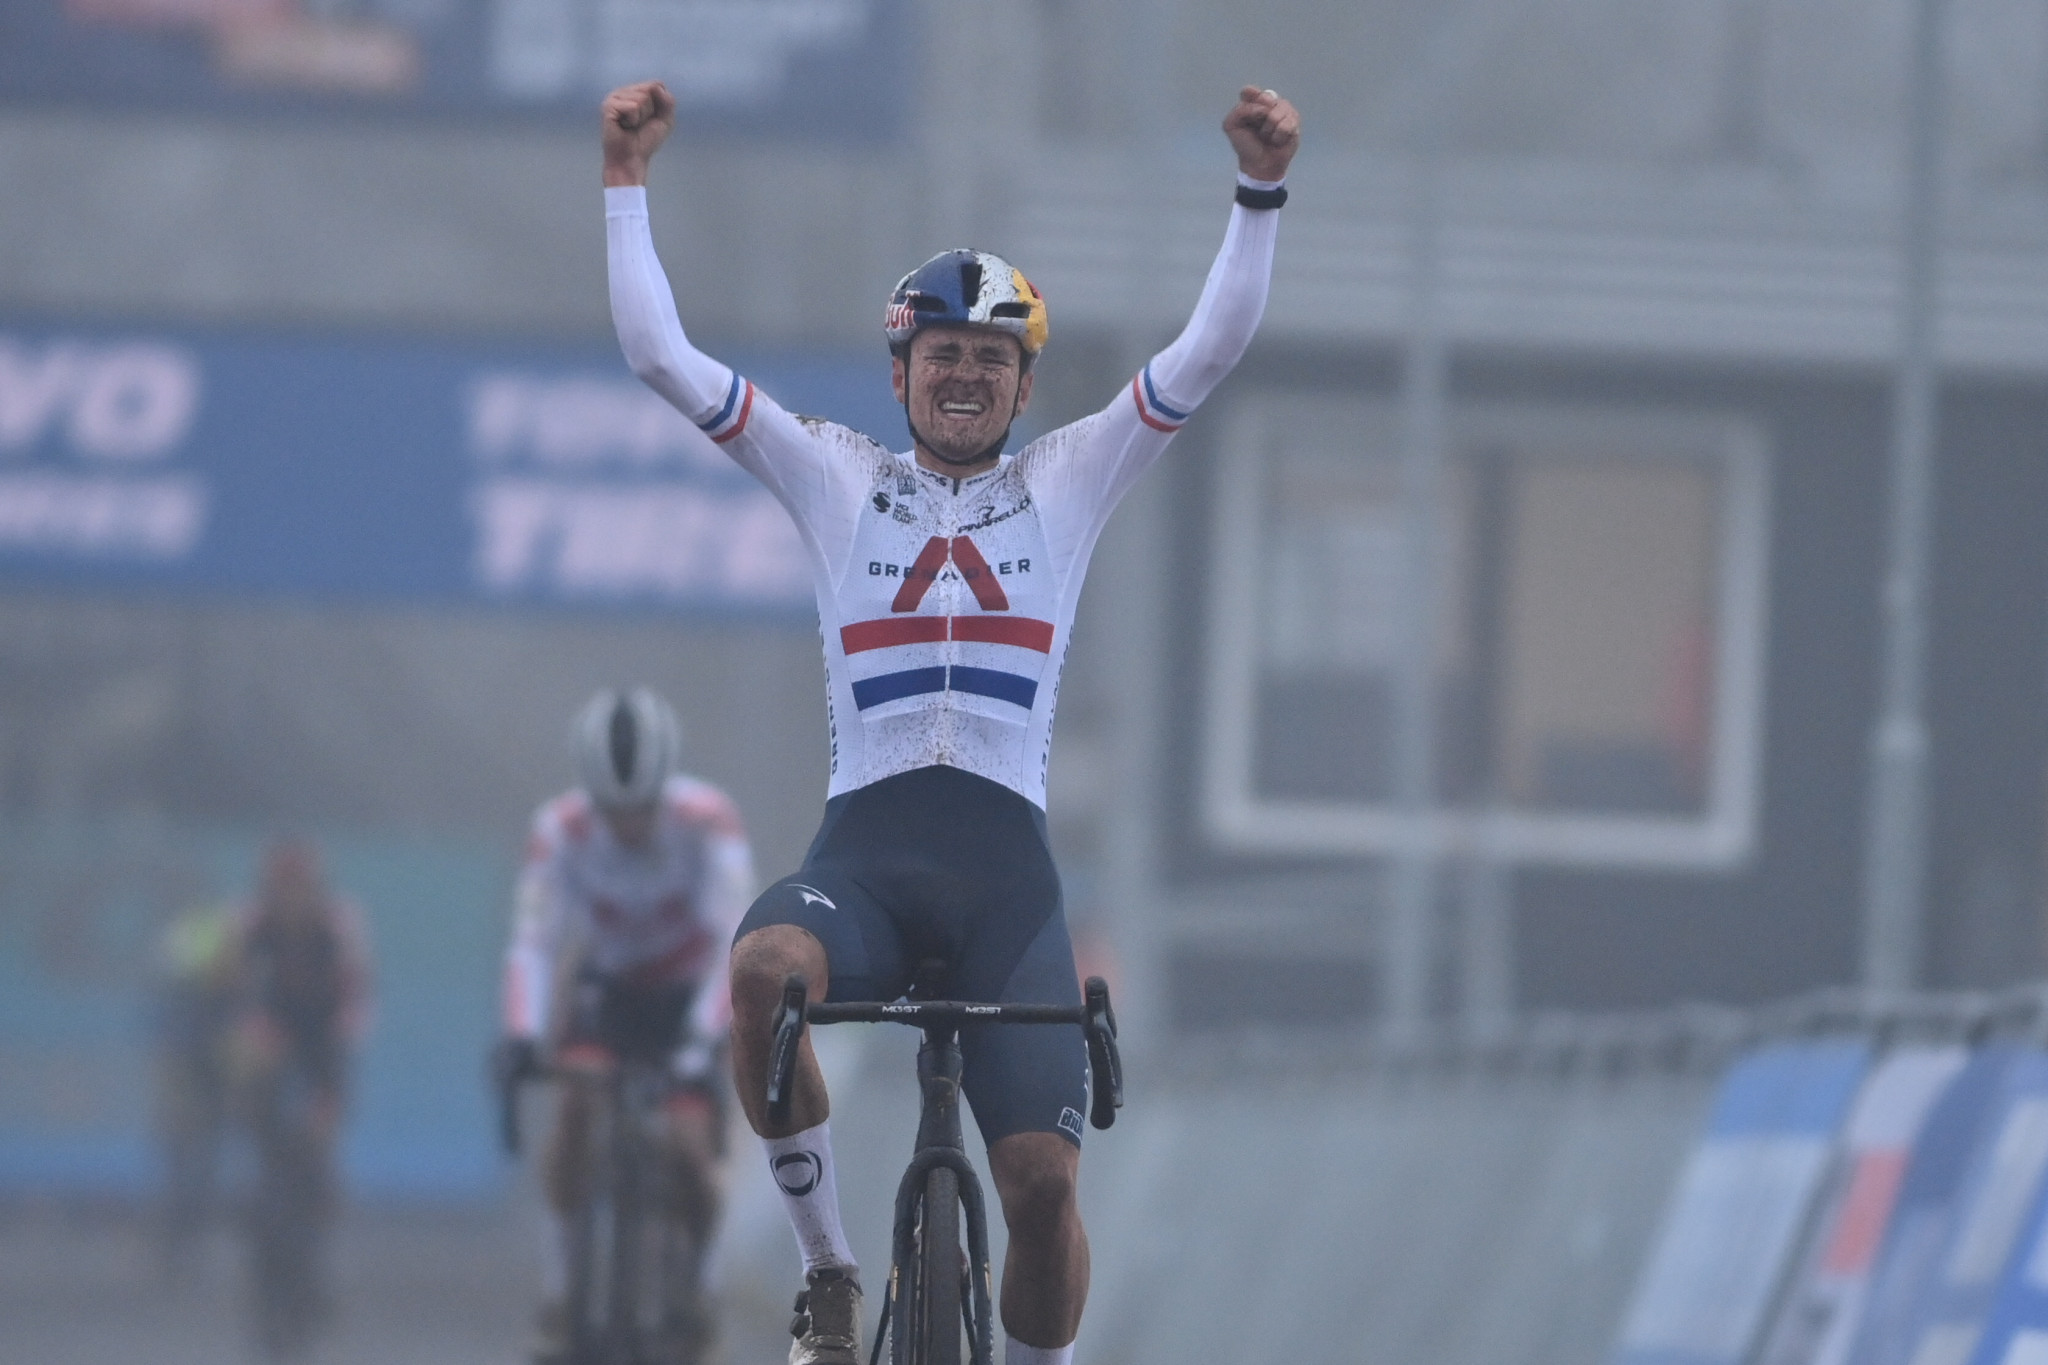 Tom Pidcock claimed Britain's first-ever UCI Cyclo-cross World Cup victory today in Rucphen ©Getty Images